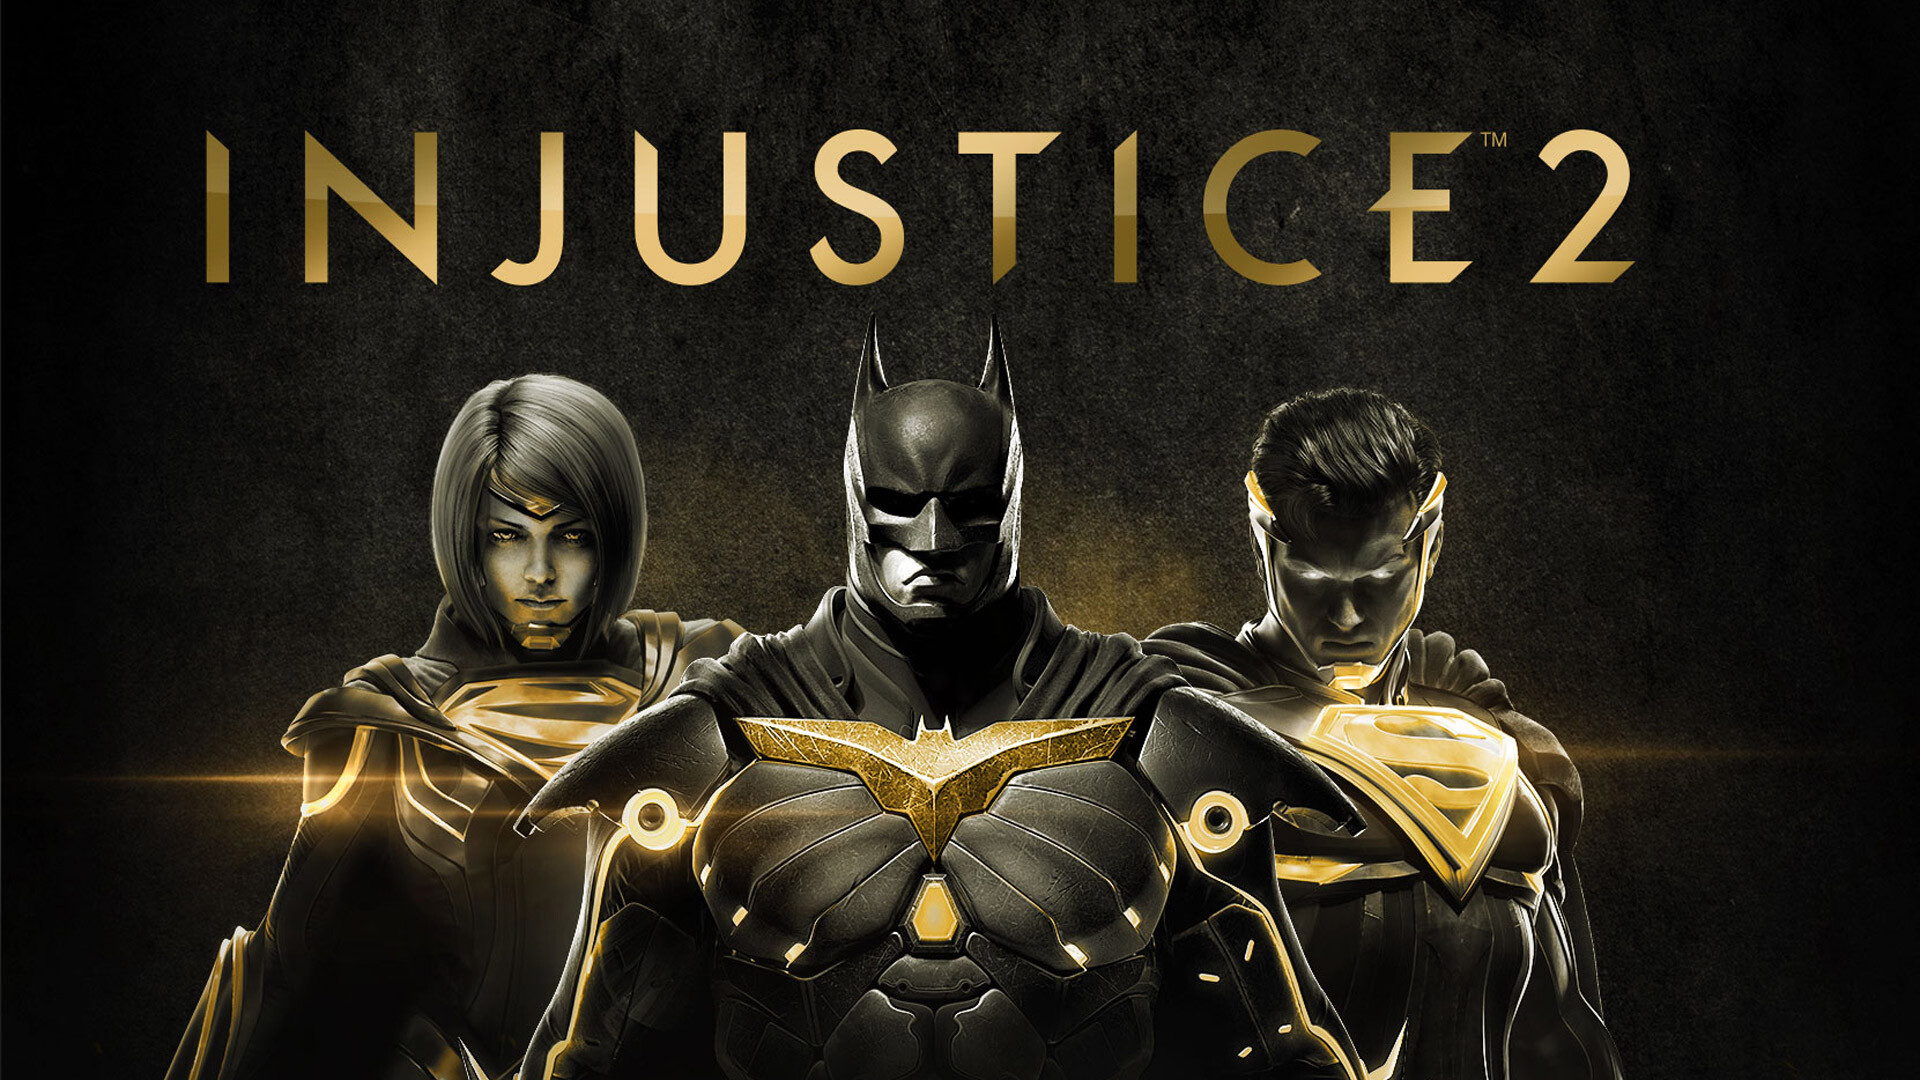 Injustice: Using different combinations of directional inputs and button presses, players must perform basic attacks, special moves, and combos to try to damage and knock out the opposing fighter. 1920x1080 Full HD Wallpaper.